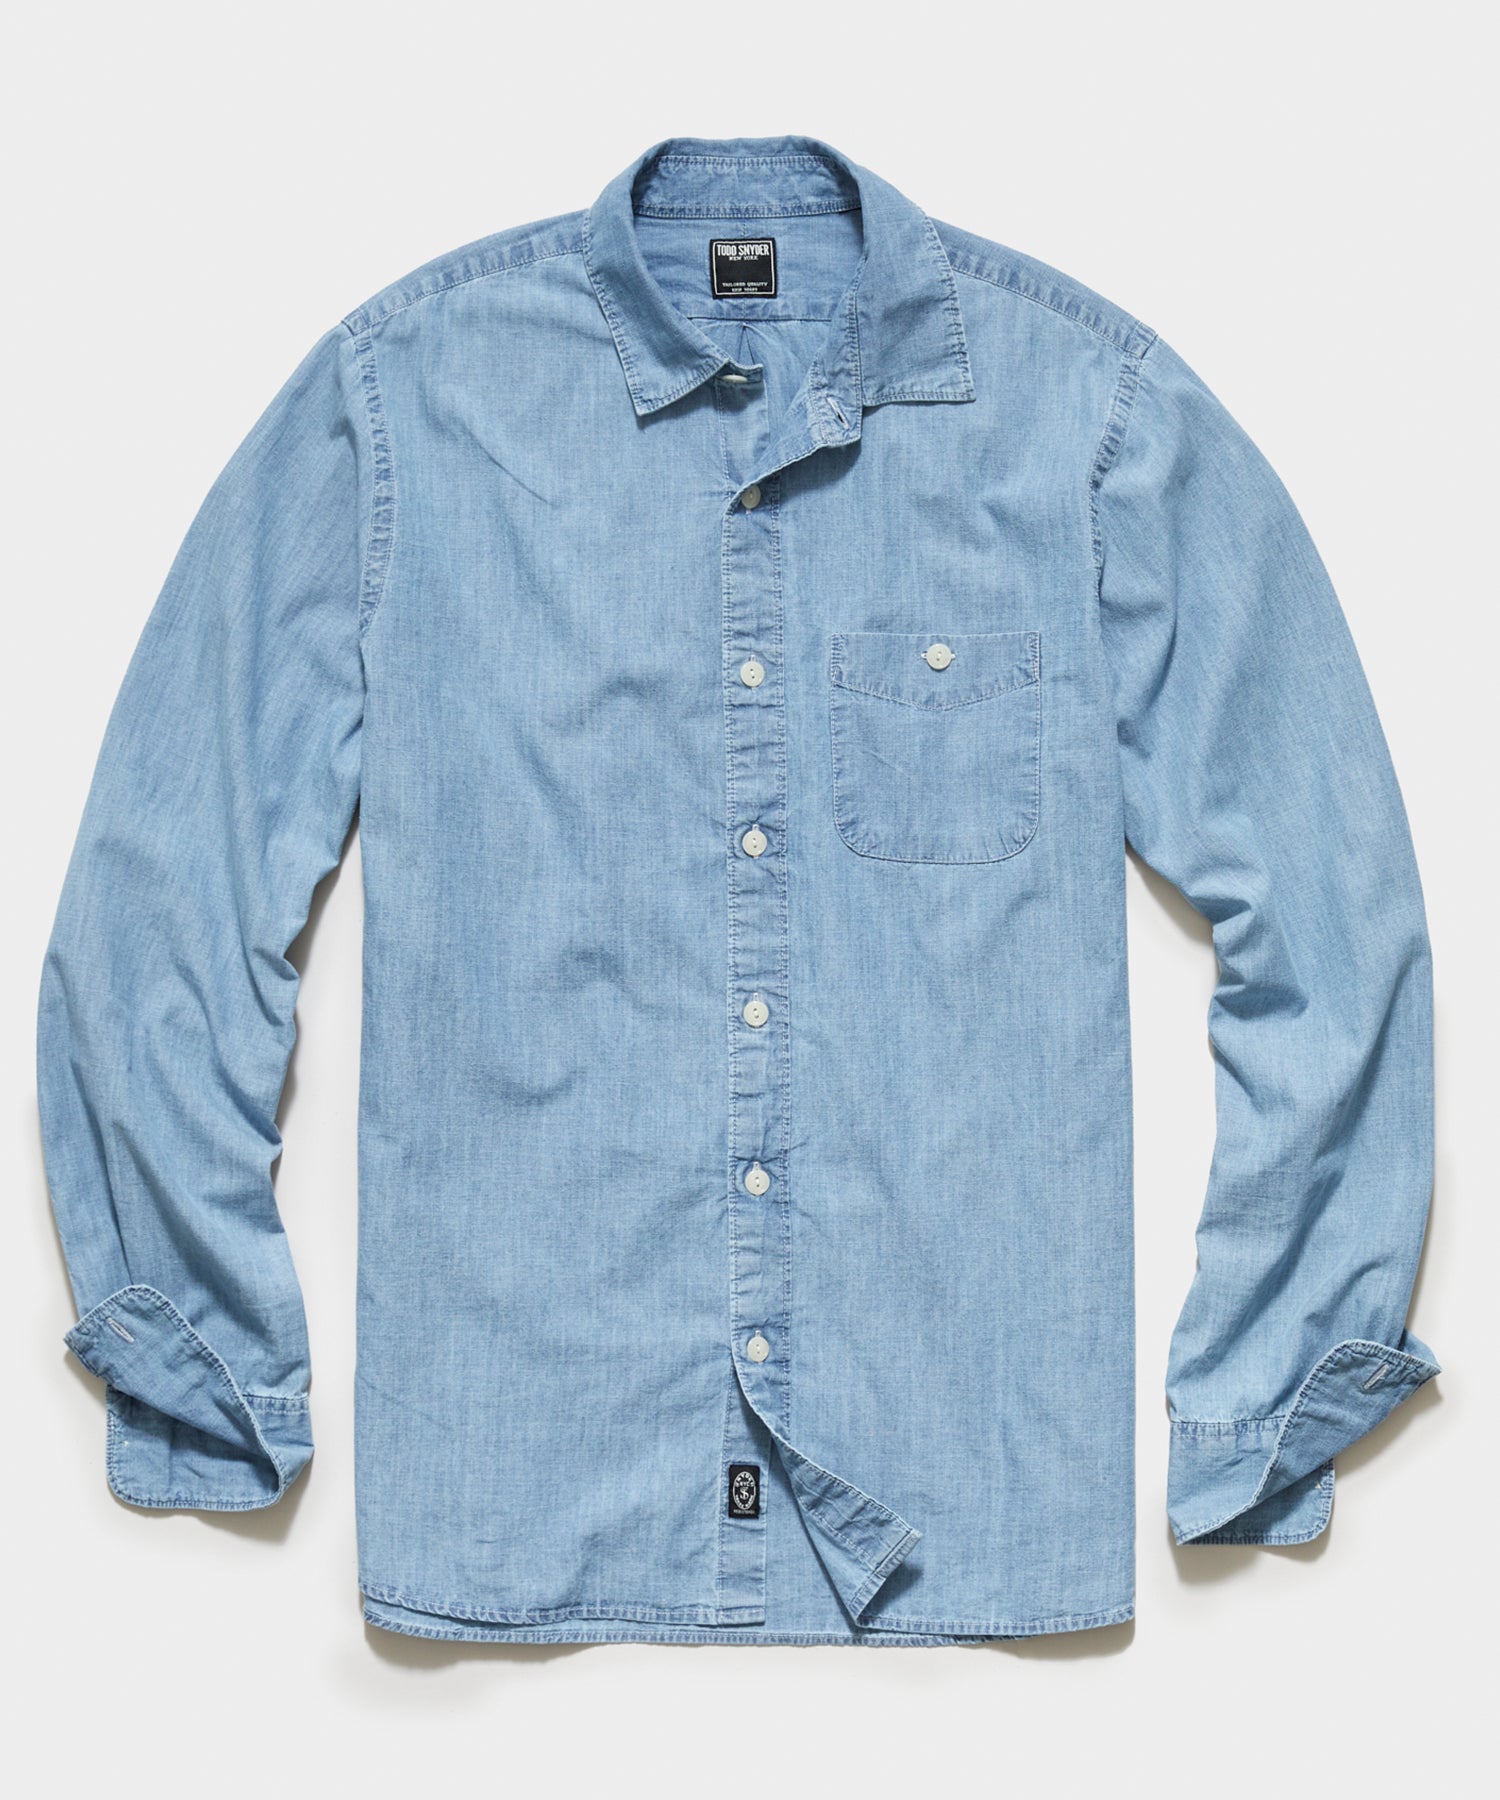 Japanese Sunfaded Chambray Button Down Shirt